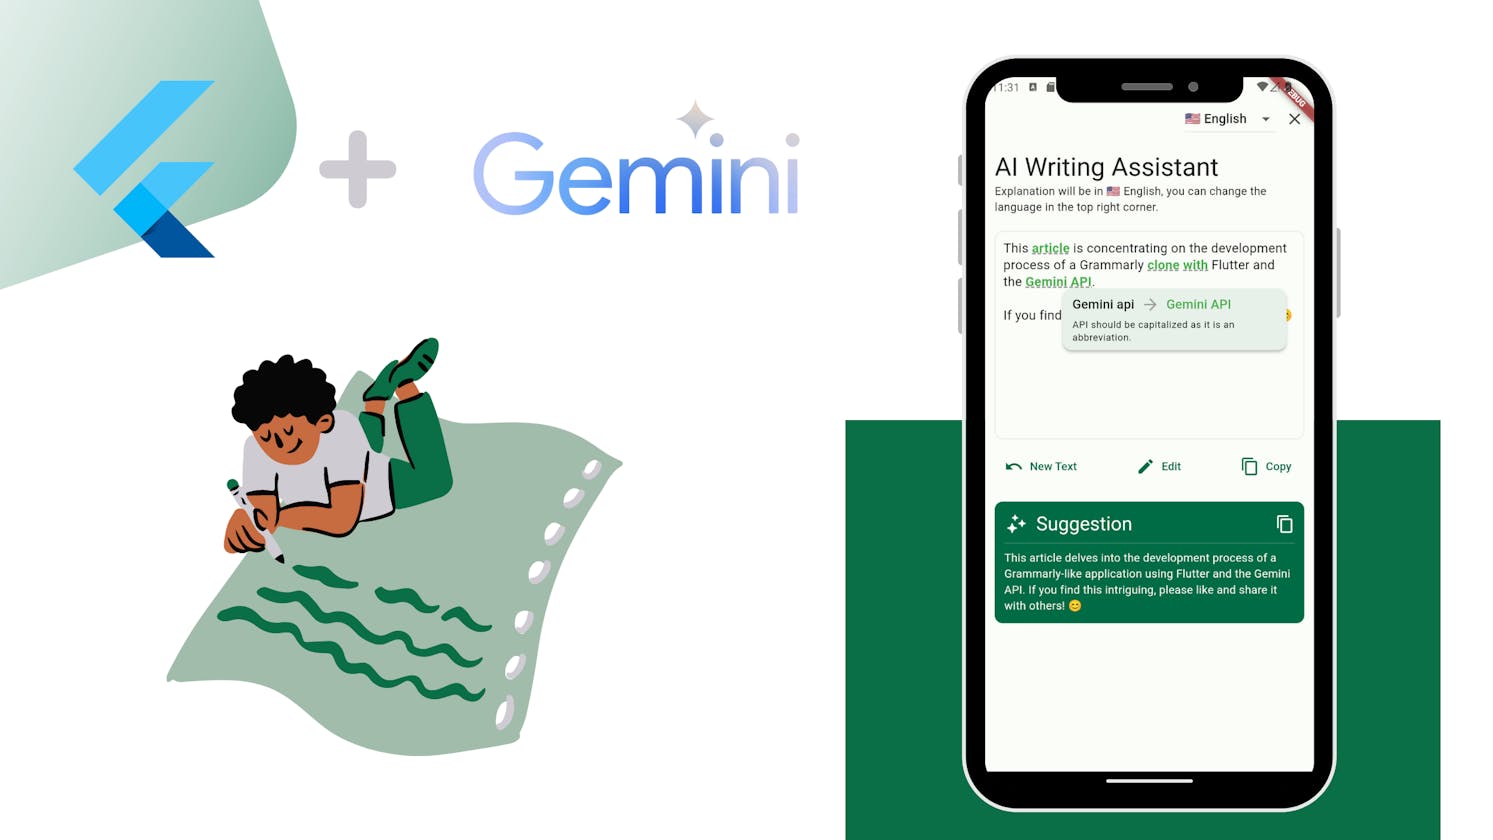 Process creation of a Grammarly-style App using Flutter and Gemini